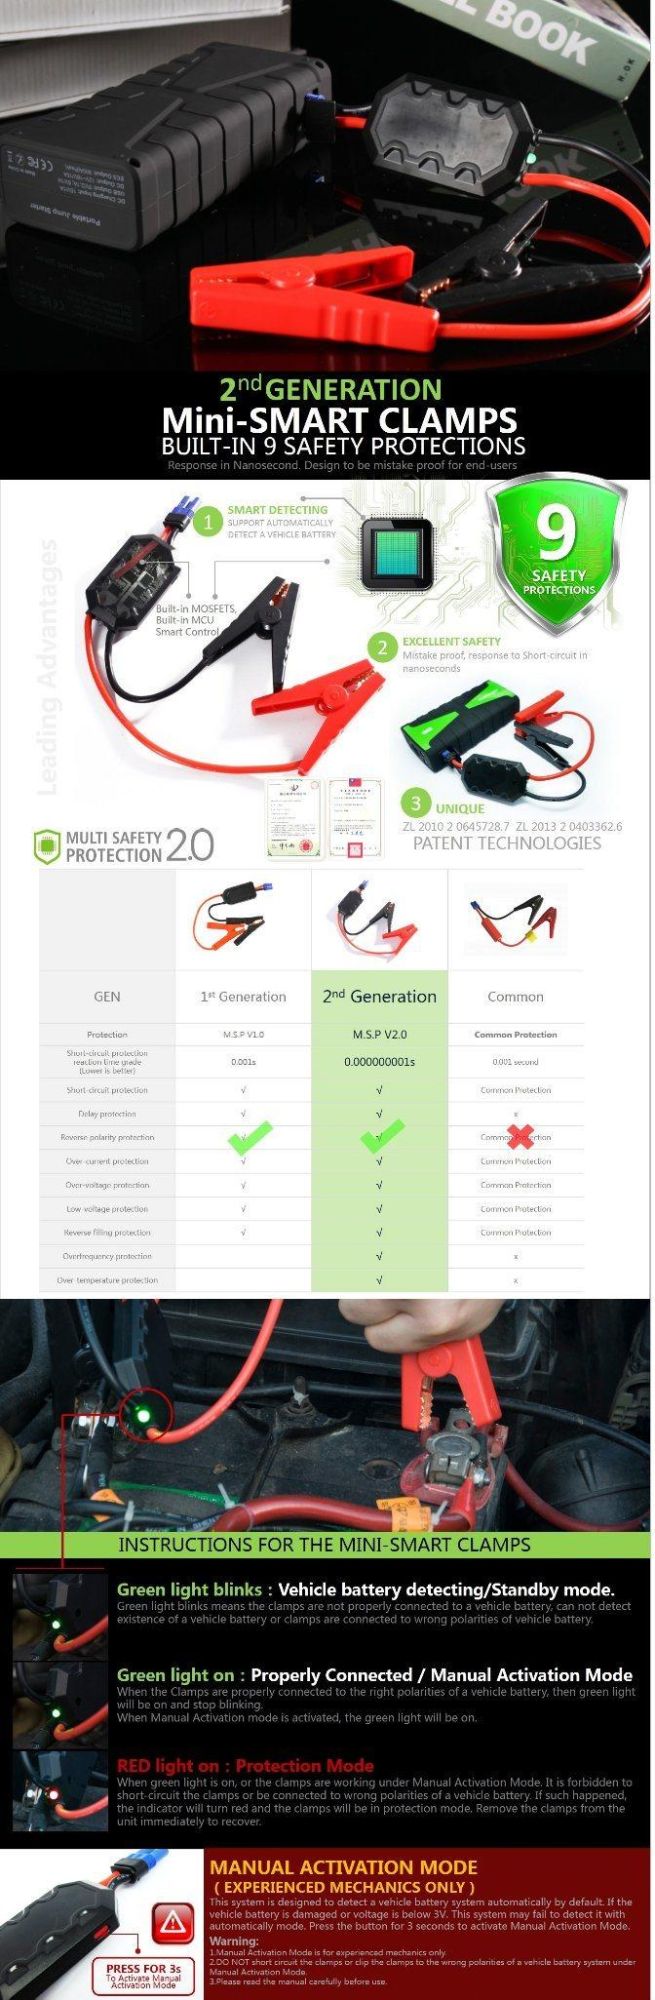 Lithium Battery Charger 16800mAh 800A Peak Car Jump Starter for Gasoline and Diesel